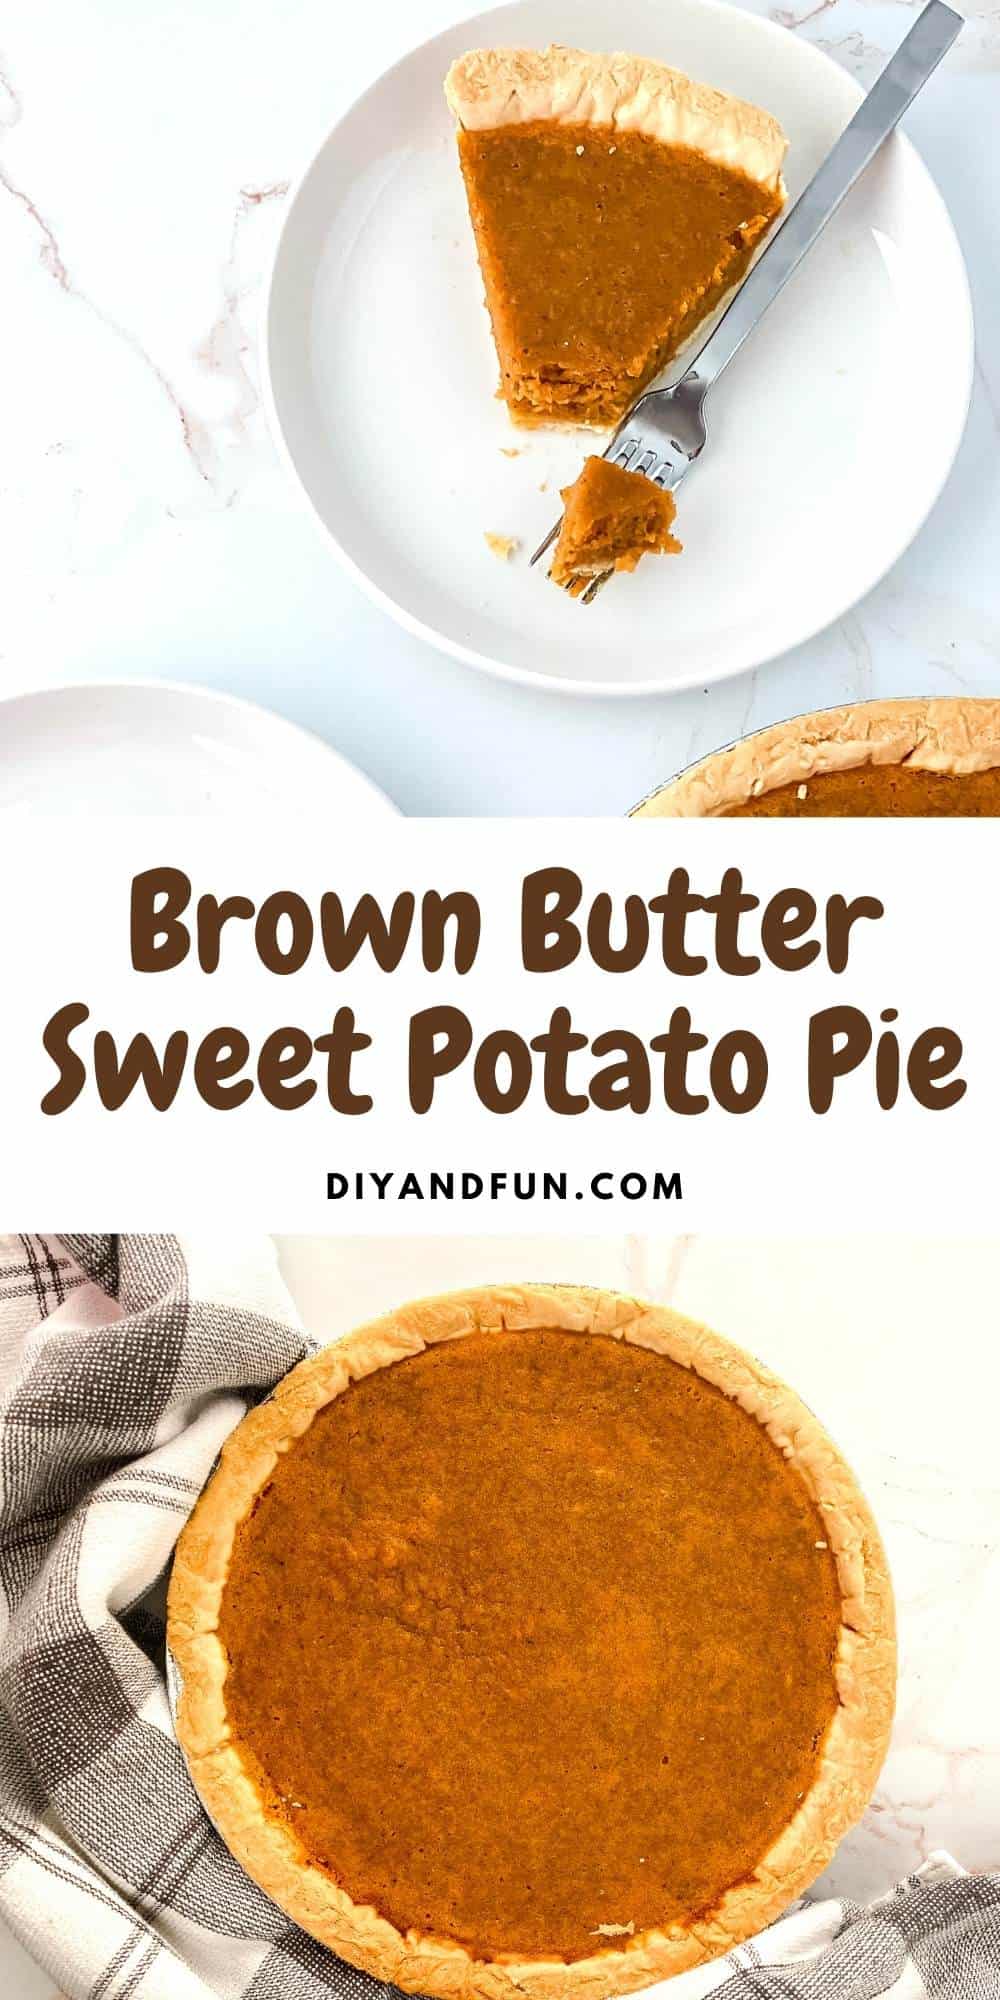 Brown Butter Sweet Potato Pie Recipe, based on a southern favorite, this tasty dessert recipe is perfect for Thanksgiving and Christmas.